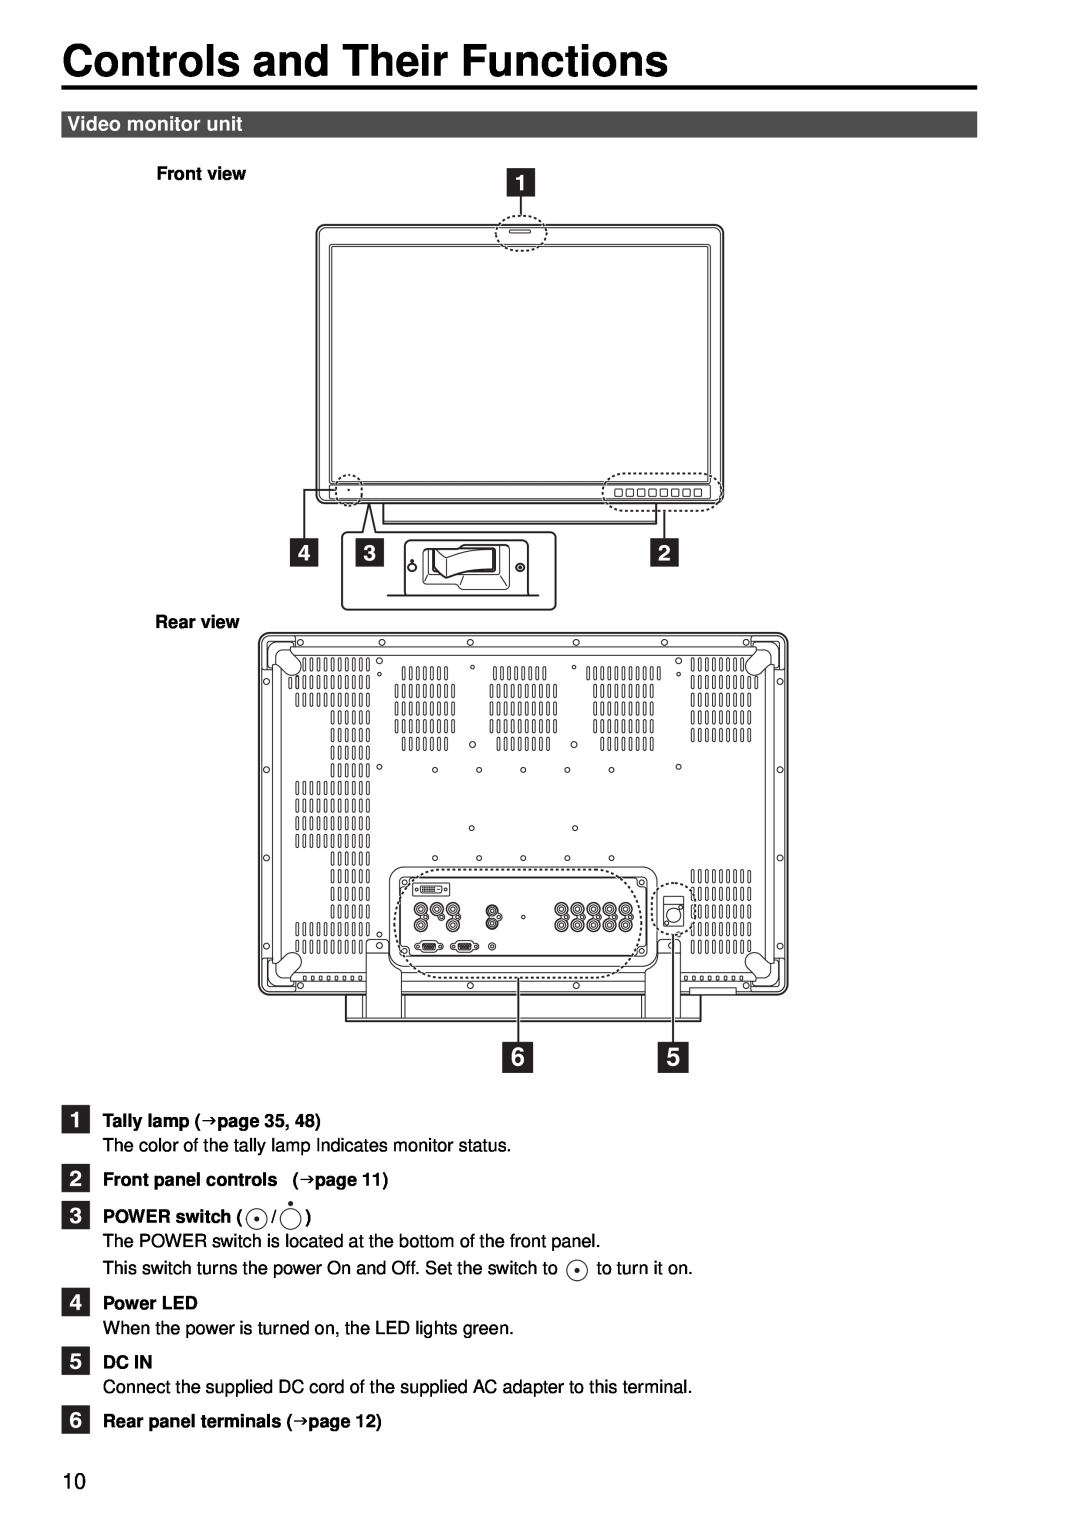 Panasonic BT-LH2550E Controls and Their Functions, Video monitor unit, Front view Rear view, Tally lamp page 35, Power LED 